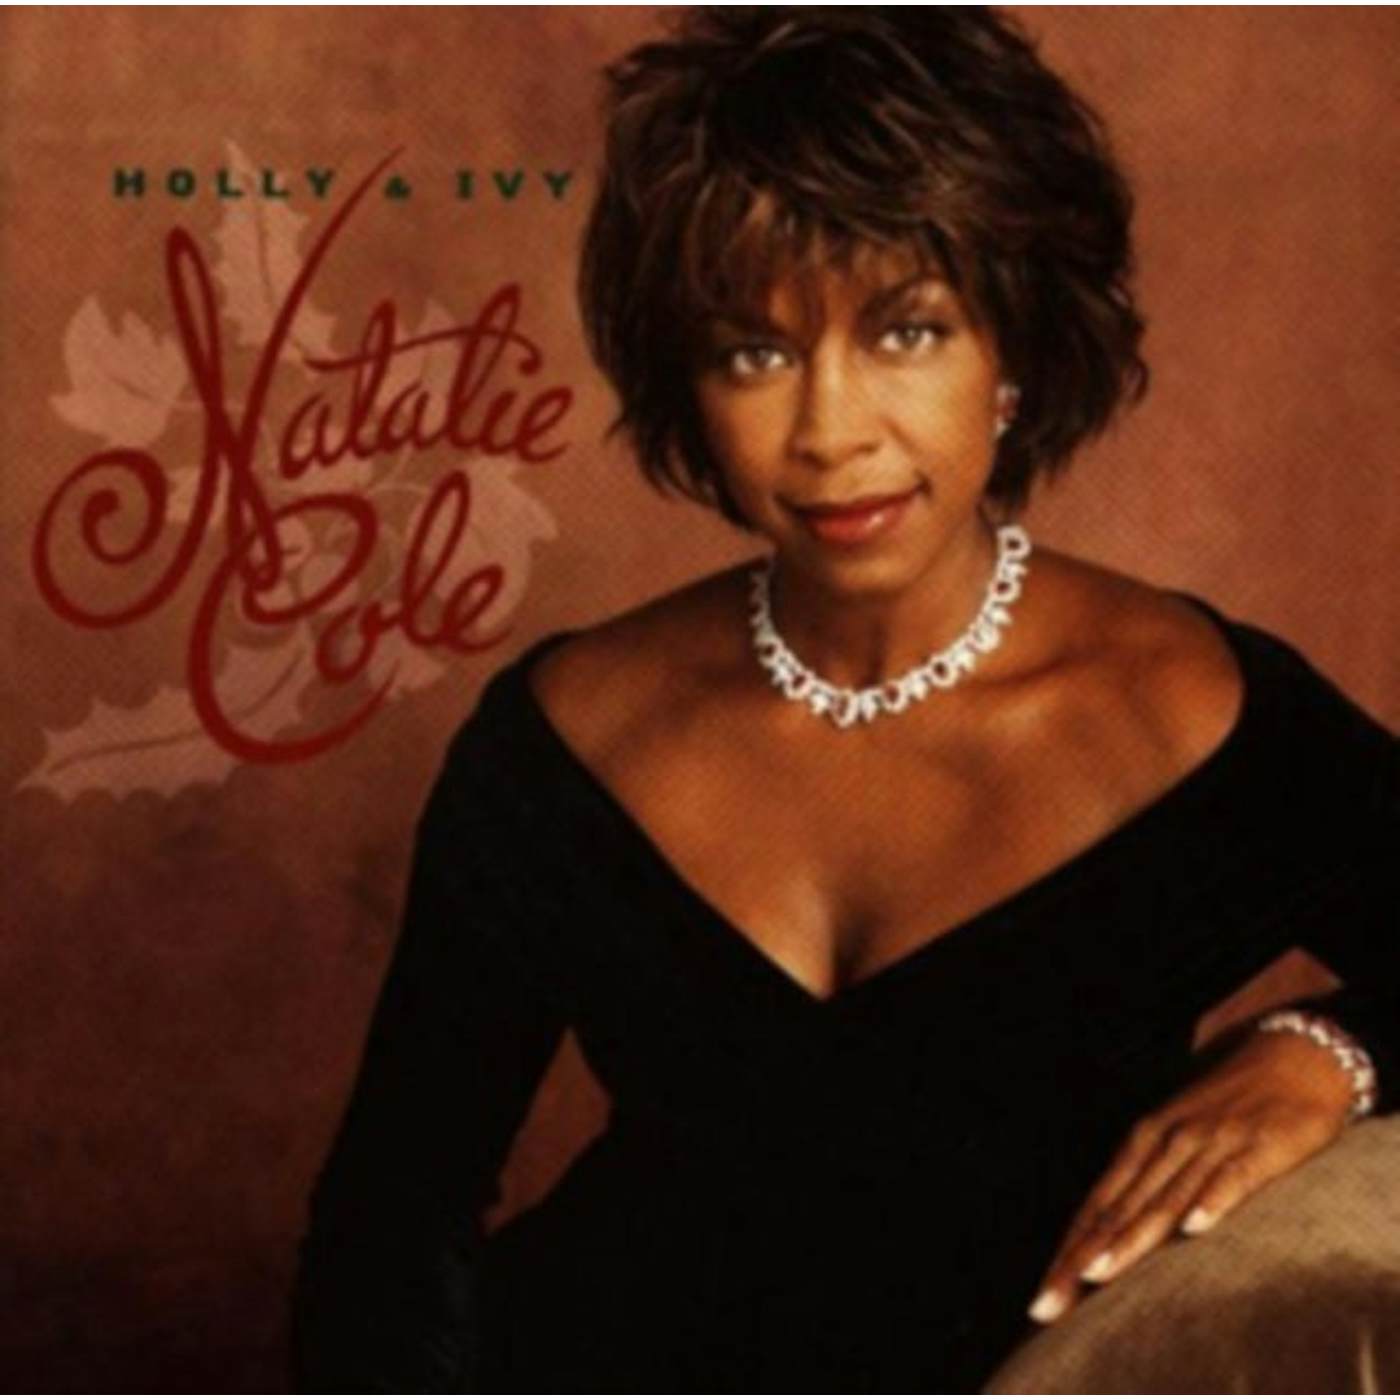 Natalie Cole CD - Holly & Ivy